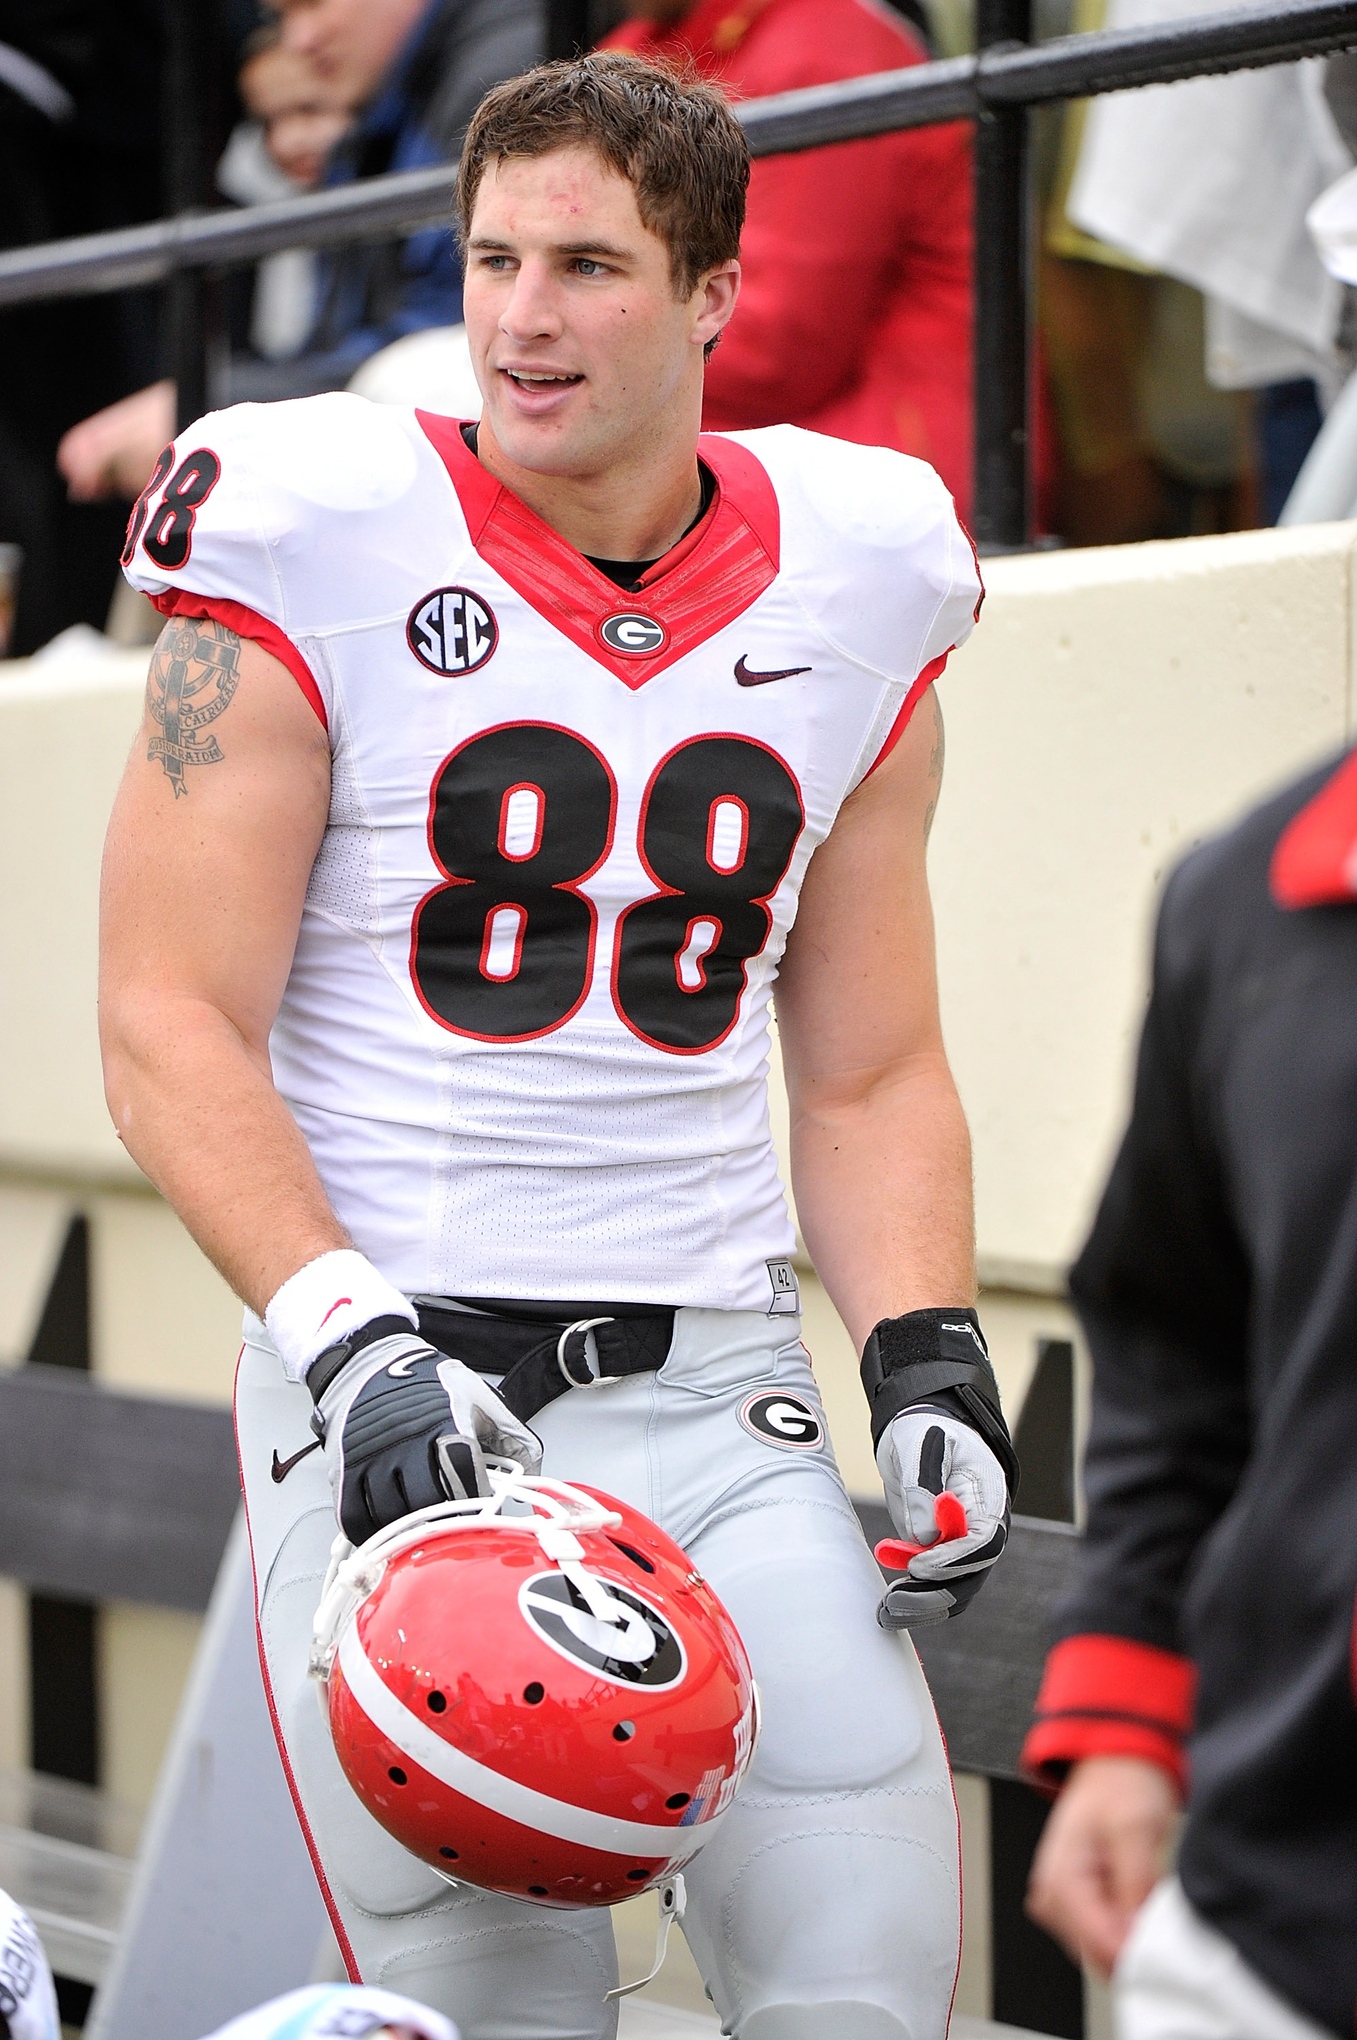 Tight end Arthur Lynch #88 of the Georgia Bulldogs watches from the sideline during a game against the Vanderbilt Commodores at Vanderbilt Stadium on October 19, 2013 in Nashville, Tennessee. 